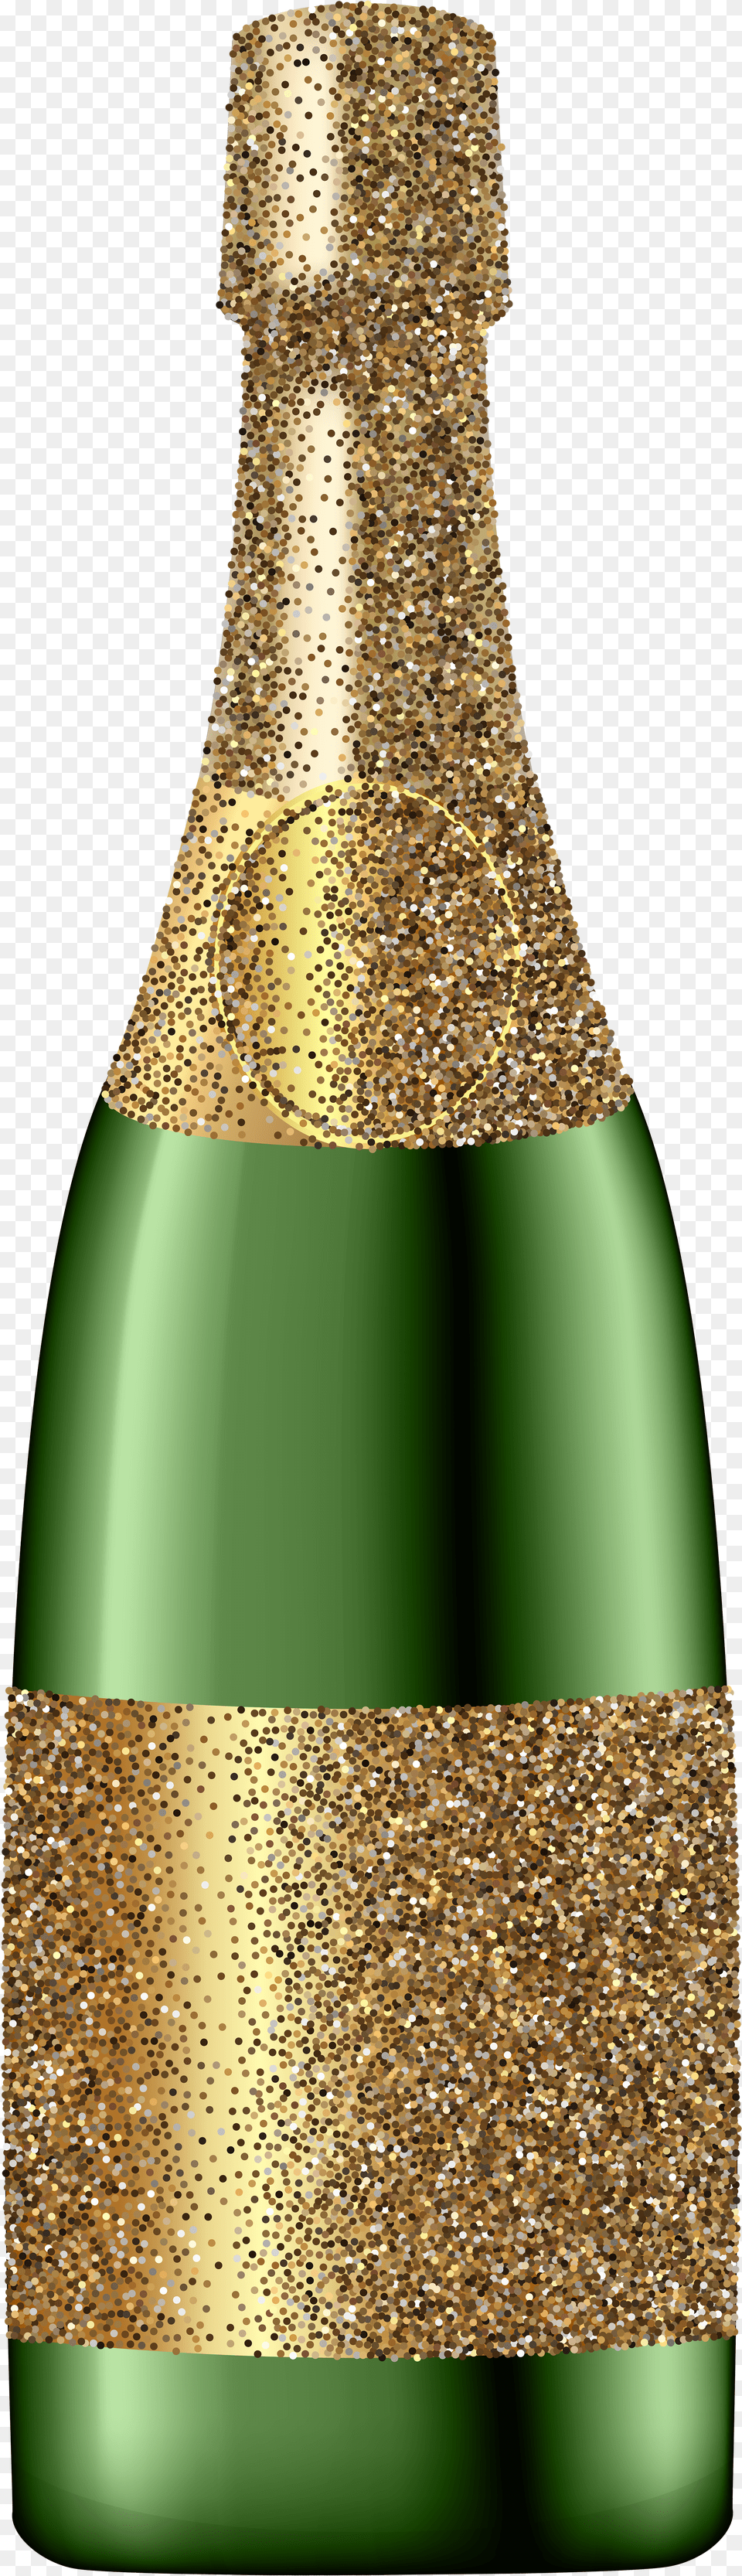 Graphic Champagne Clip Art Image Gallery Yopriceville Glitter Champagne Bottle Free Png